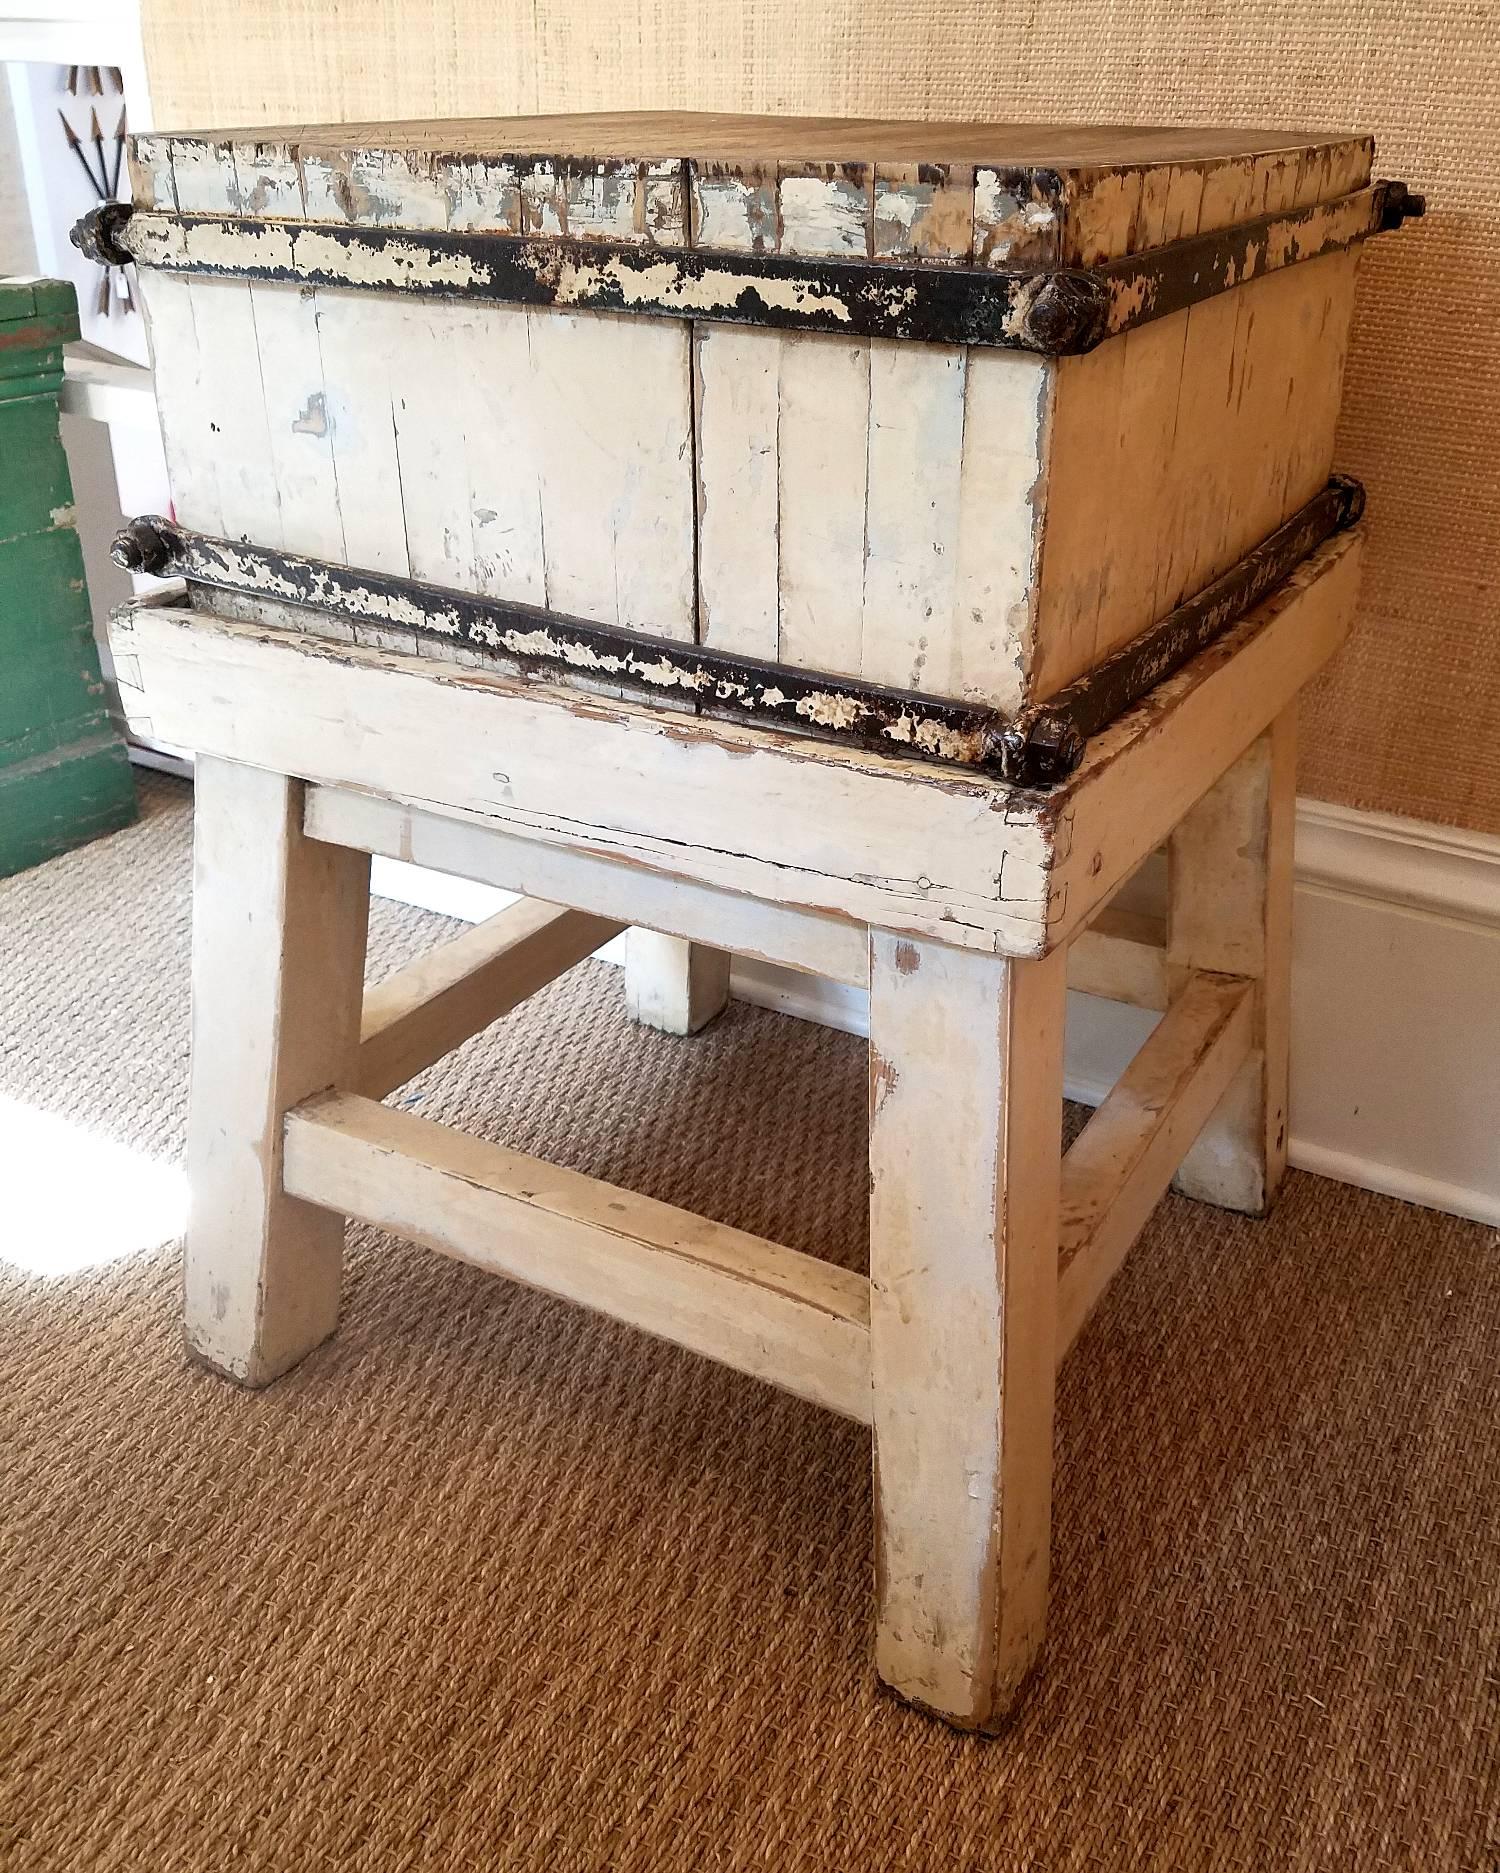 Such a wonderful piece, and with such character. French circa 1900, the French oak top is strengthened by the hand-wrought iron belting. The block can be removed for easy transportation. Great patina on the milk paint surface, iron workings and the